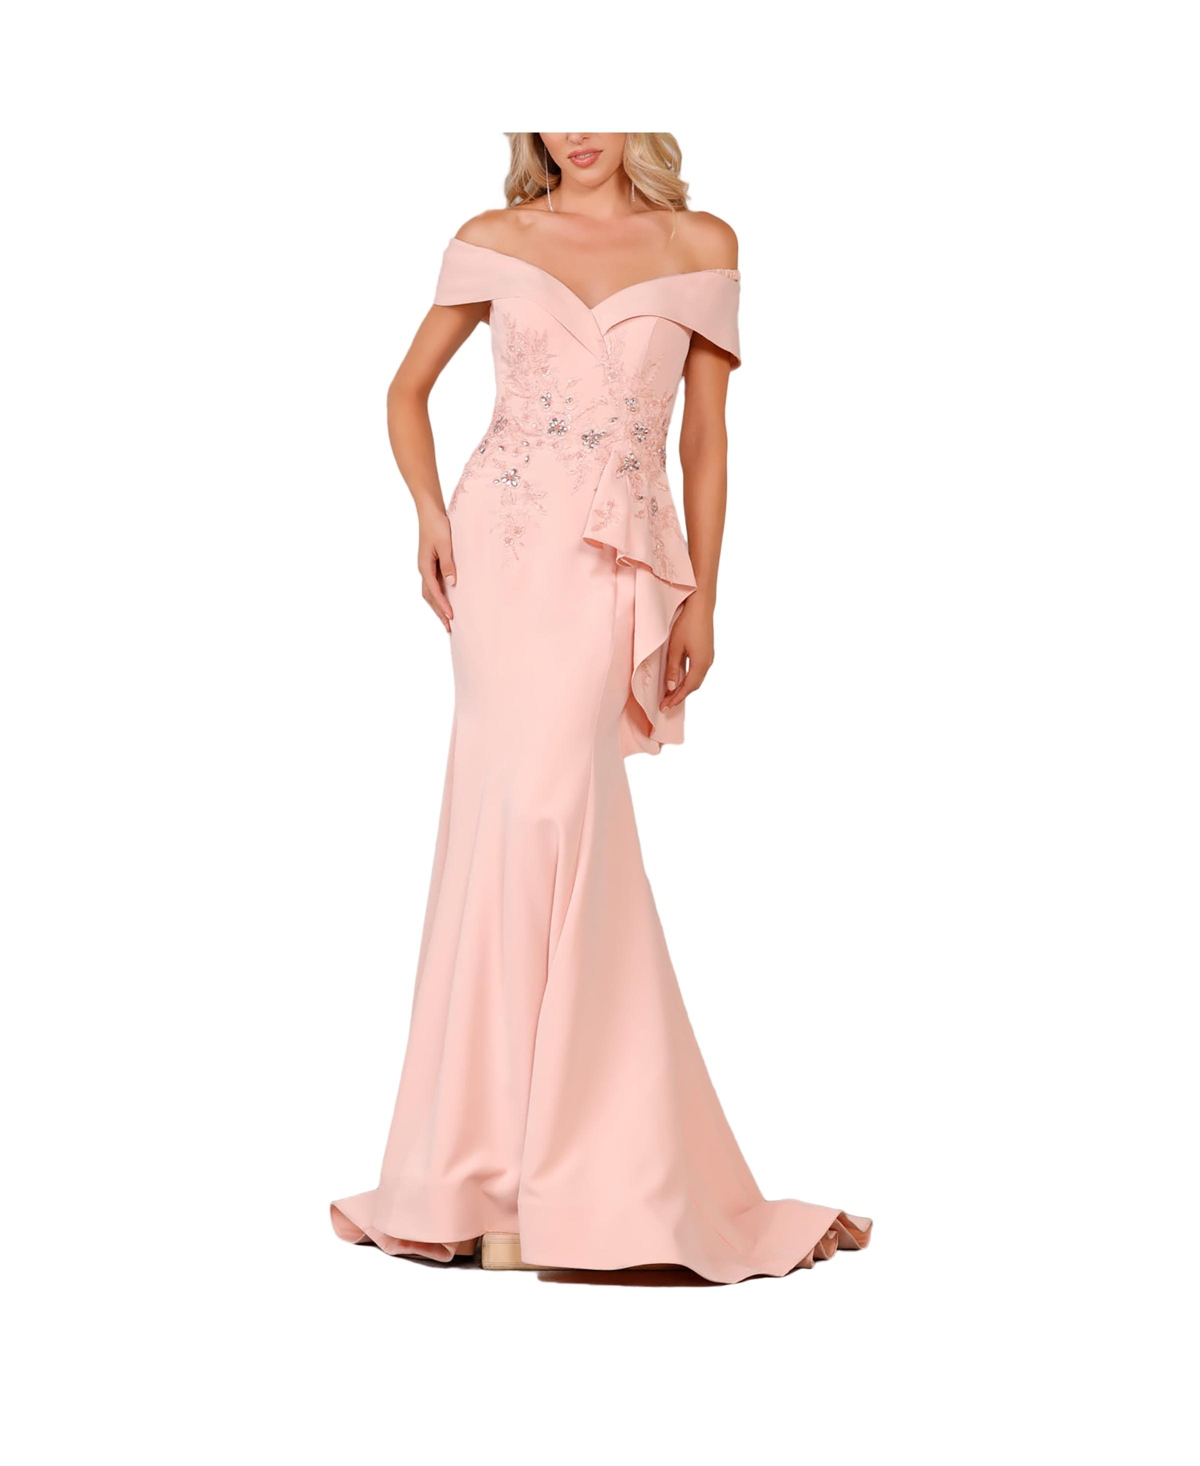 Women's Terani Couture Off Shoulder With Side Peplum Dress - Blush